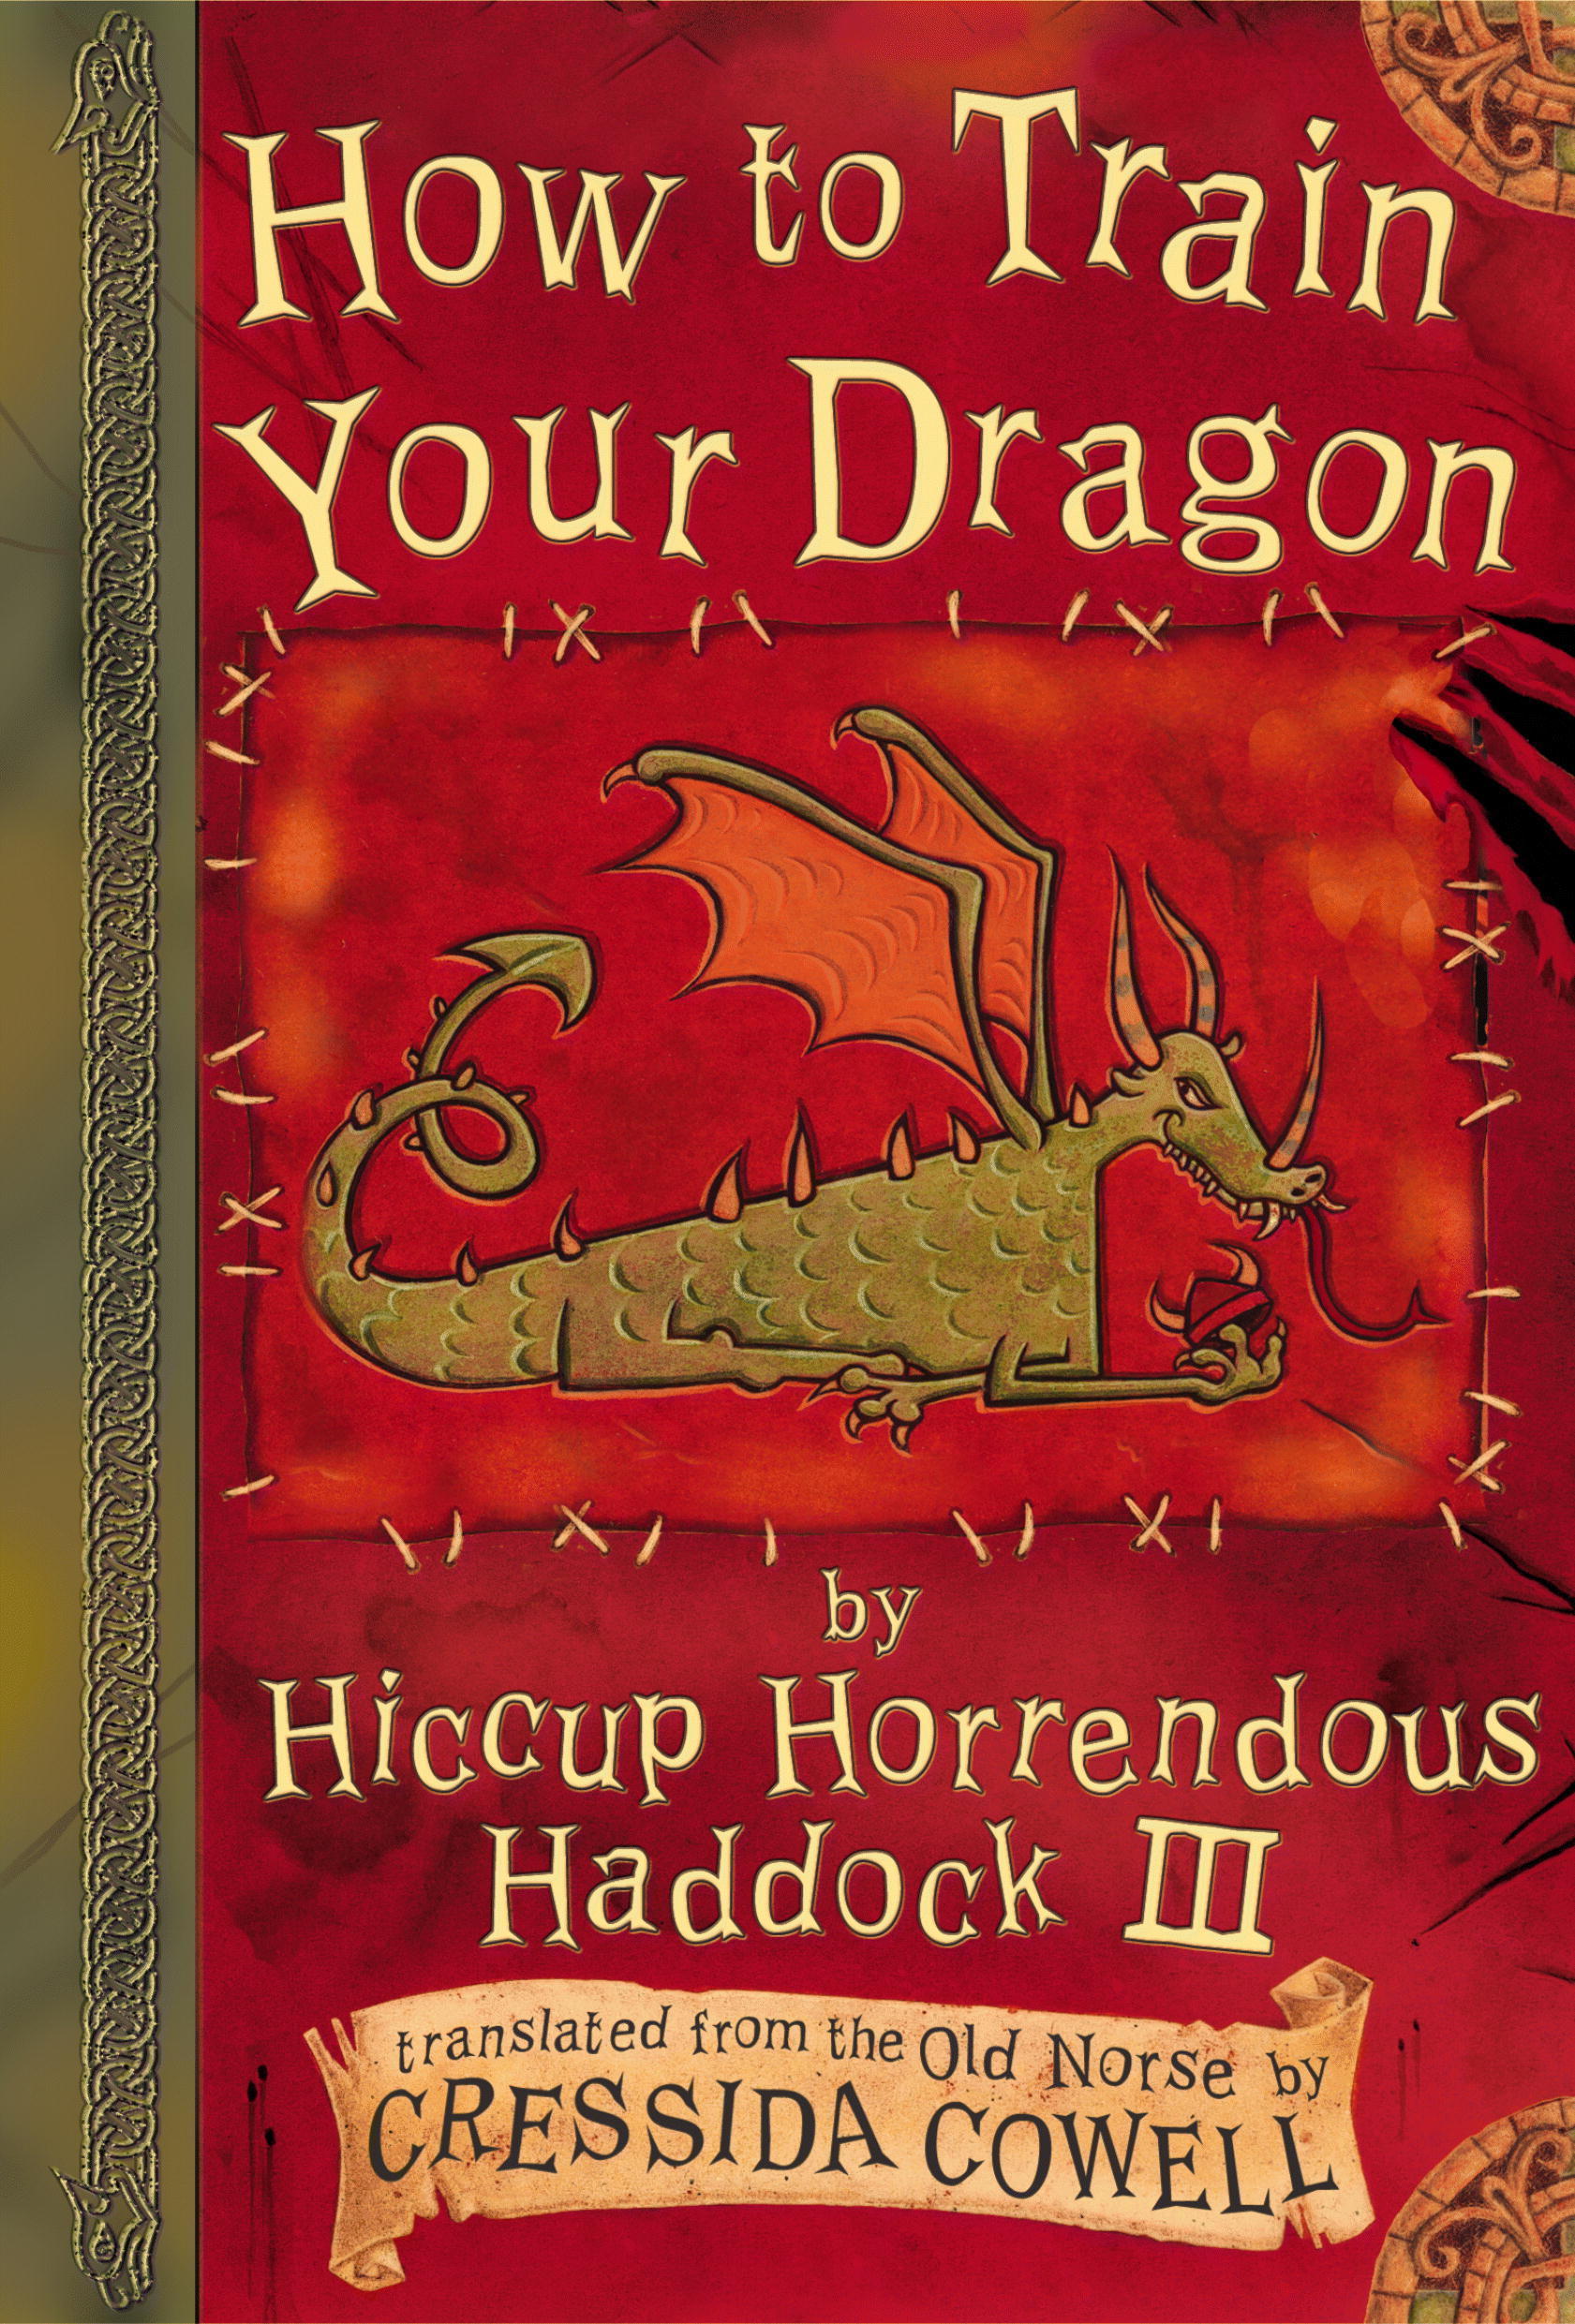 how-to-train-your-dragon-book-how-to-train-your-dragon-photo